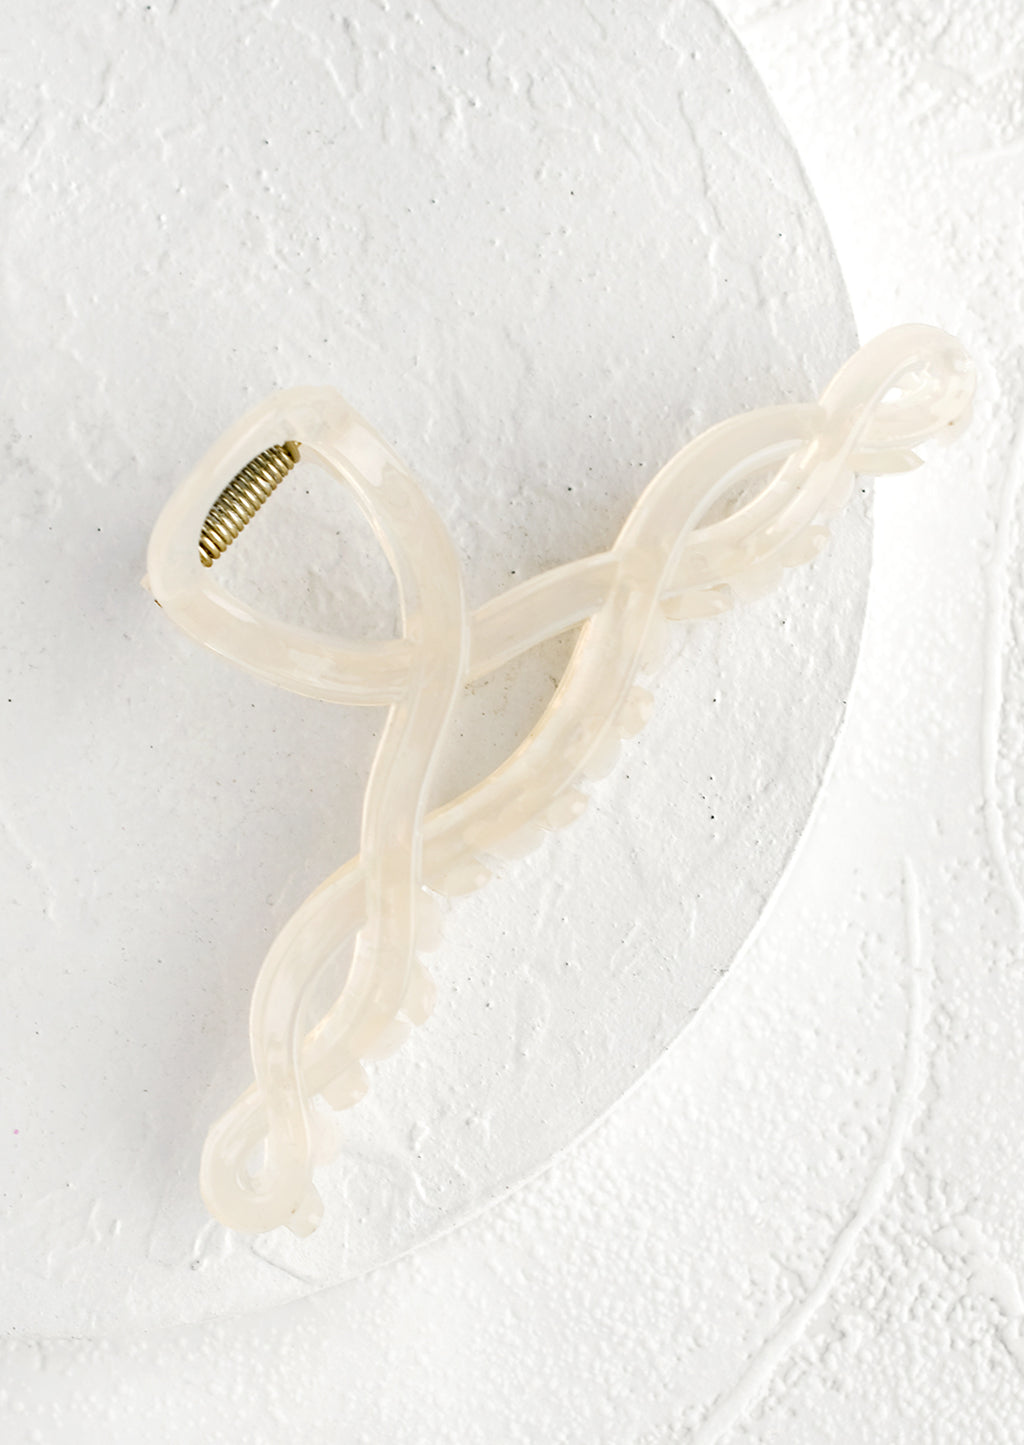 Translucent: A spiral shaped hair claw in translucent white.